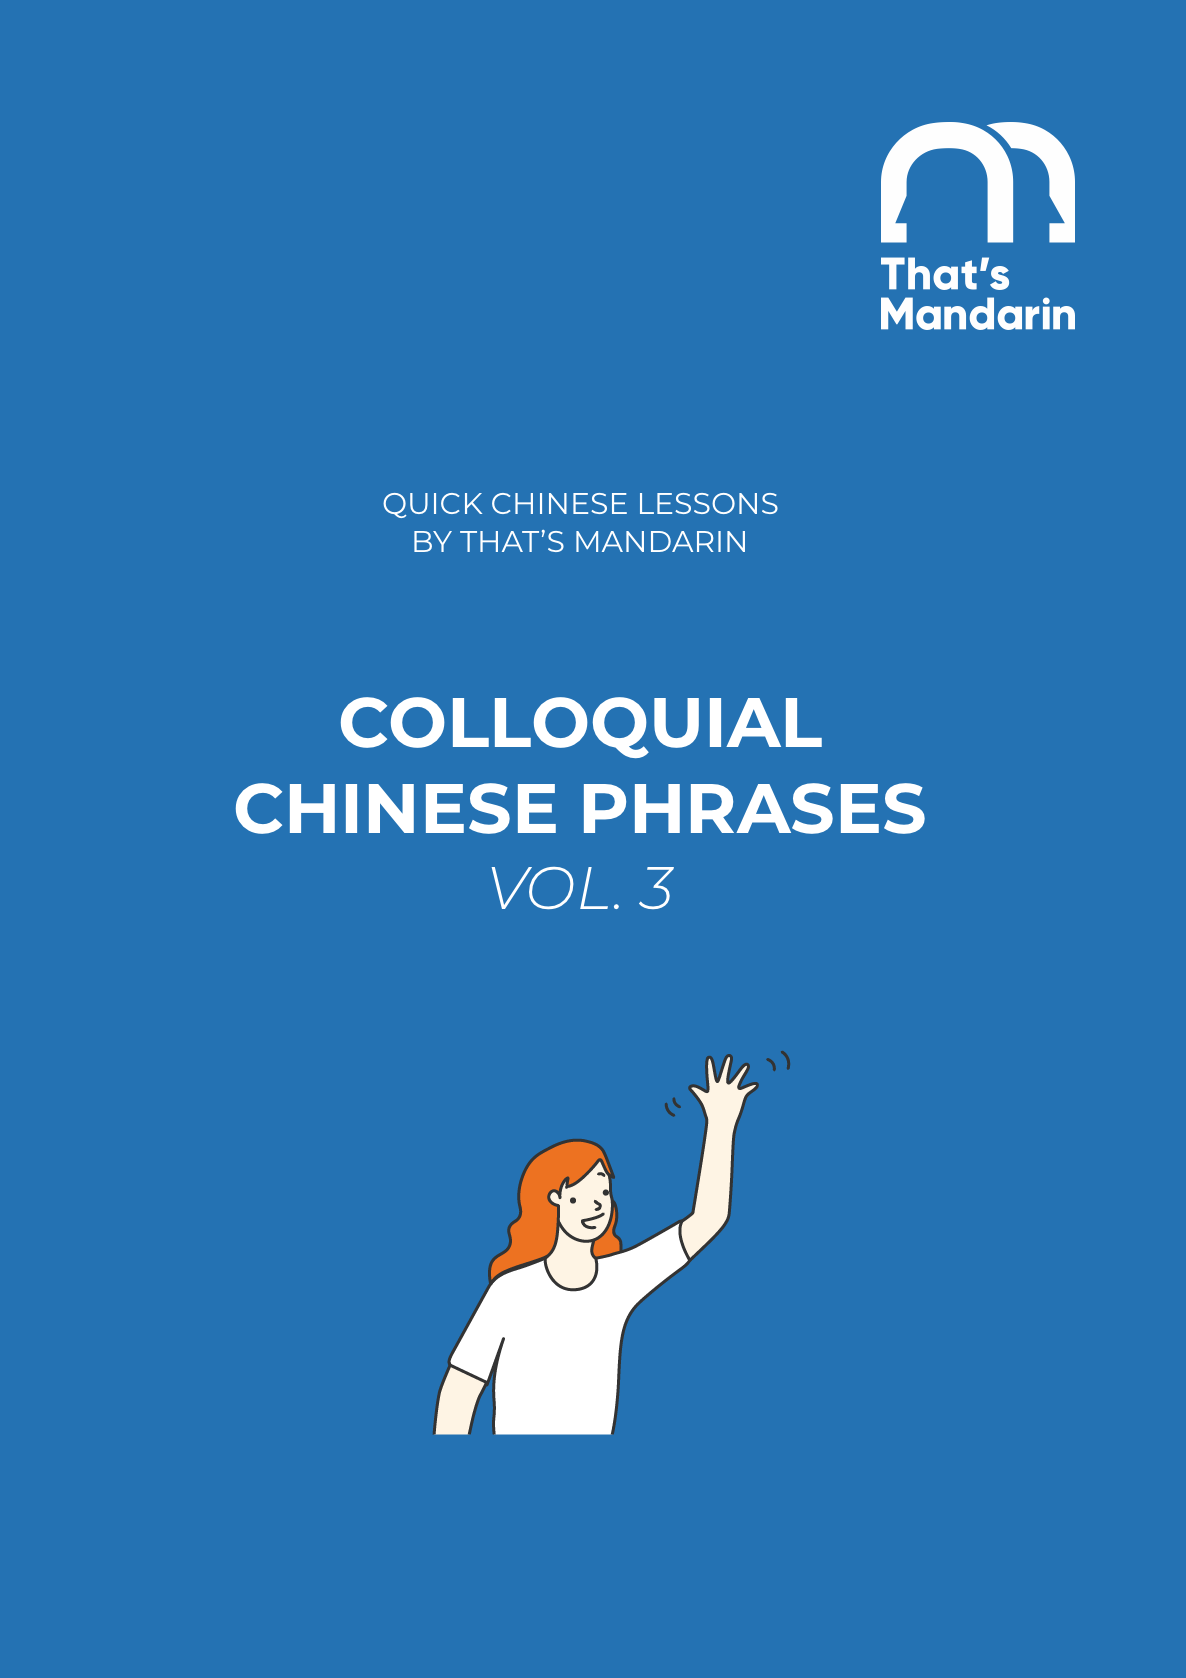 Colloquial Chinese Phrases, Vol. 3 by That's Mandarin PDF